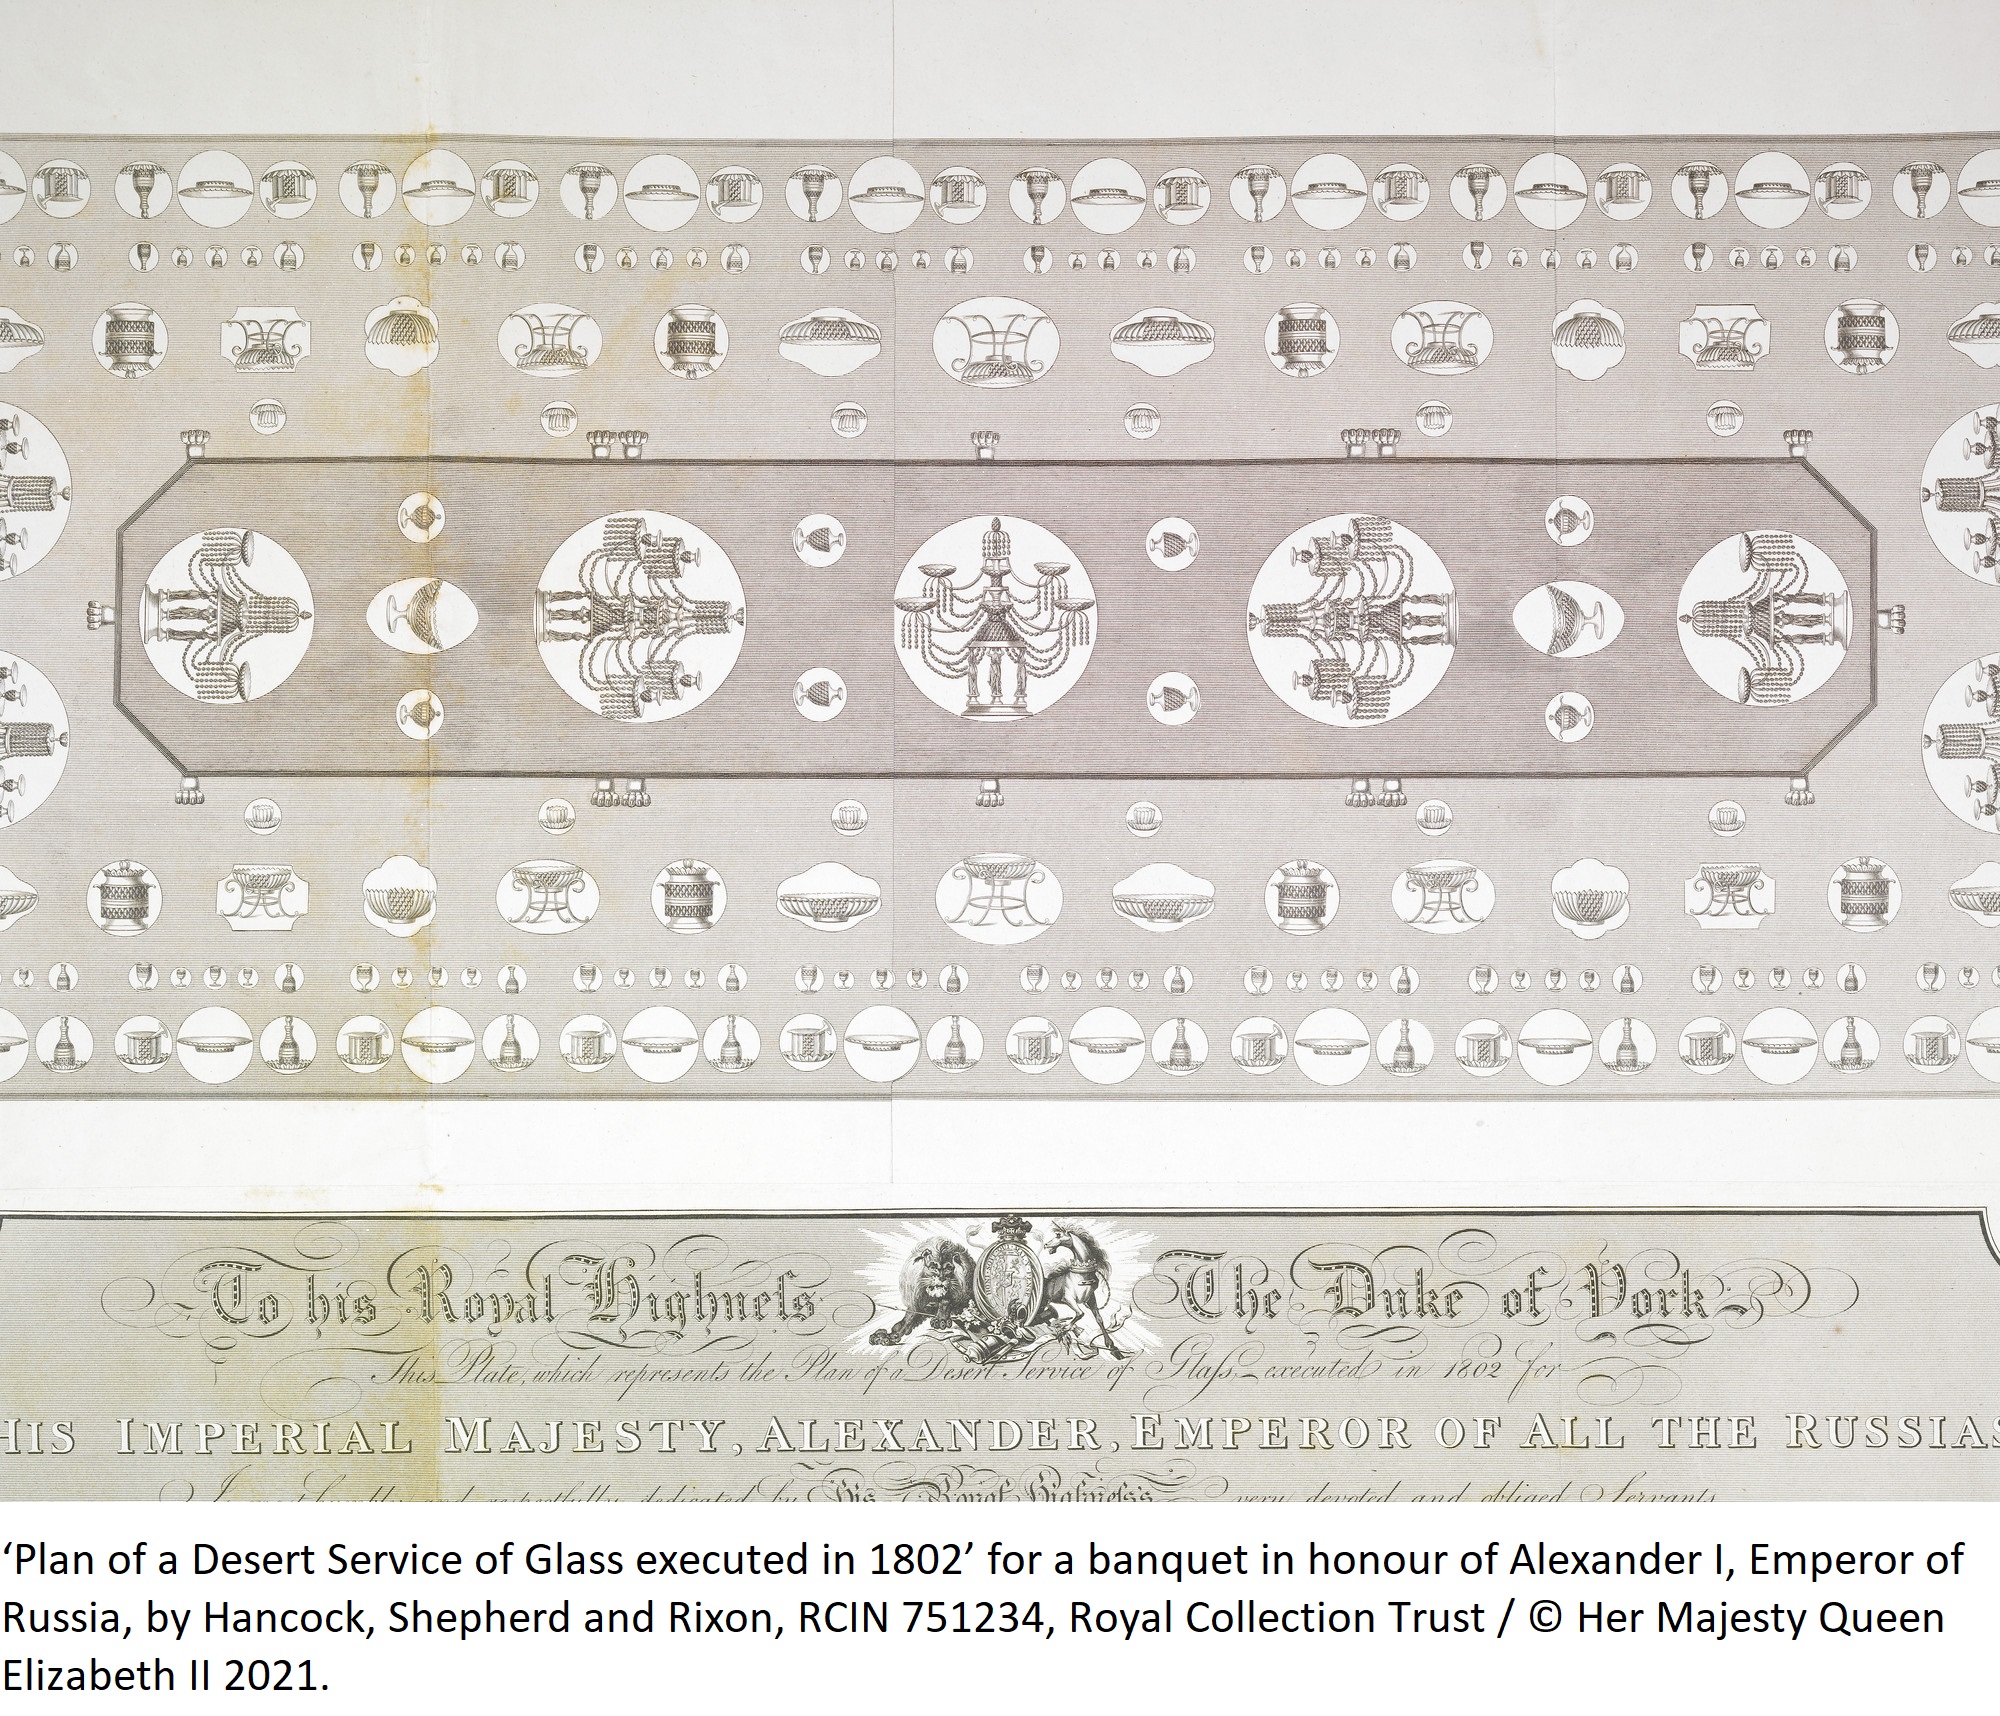 ‘Plan of a Desert Service of Glass executed in 1802’ for a banquet in honour of Alexander I, Emperor of Russia, by Hancock, Shepherd and Rixon, RCIN 751234, Royal Collection Trust / © Her Majesty Queen Elizabeth II 2021.